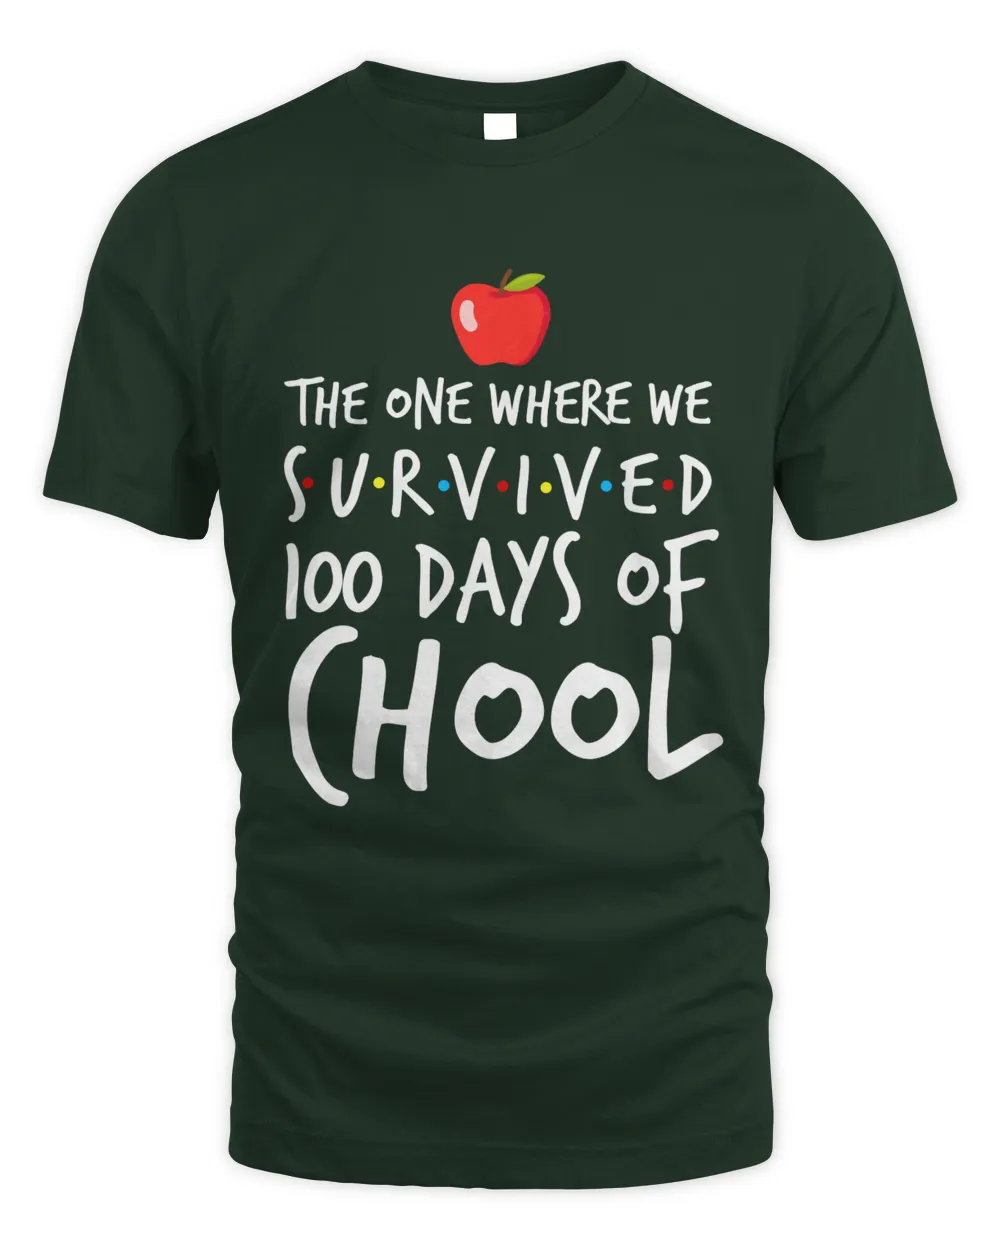 The one where we svrvived 100 days of school